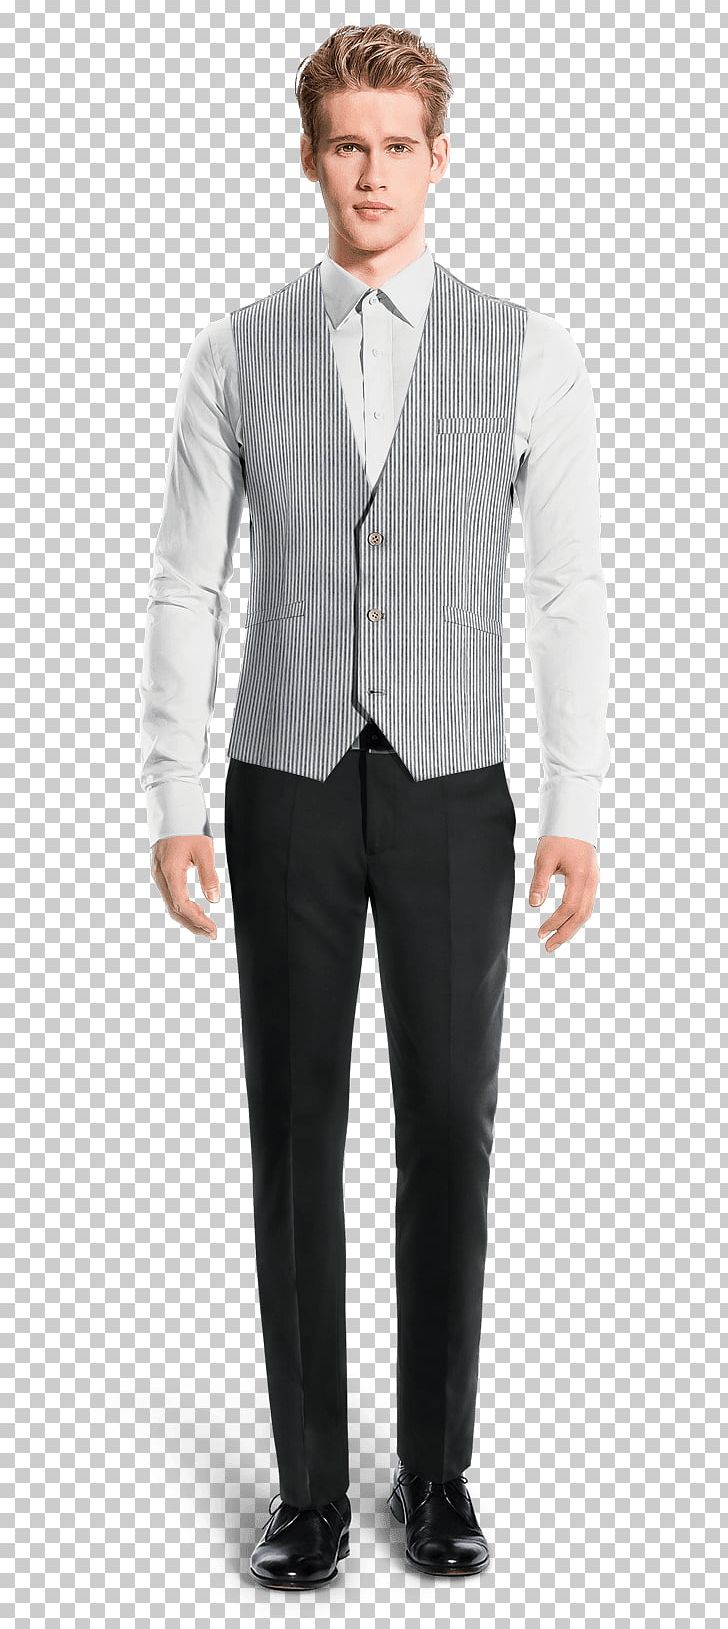 Suit Tweed Pants Wool Chino Cloth PNG, Clipart, Blazer, Business, Businessperson, Chino Cloth, Clothing Free PNG Download